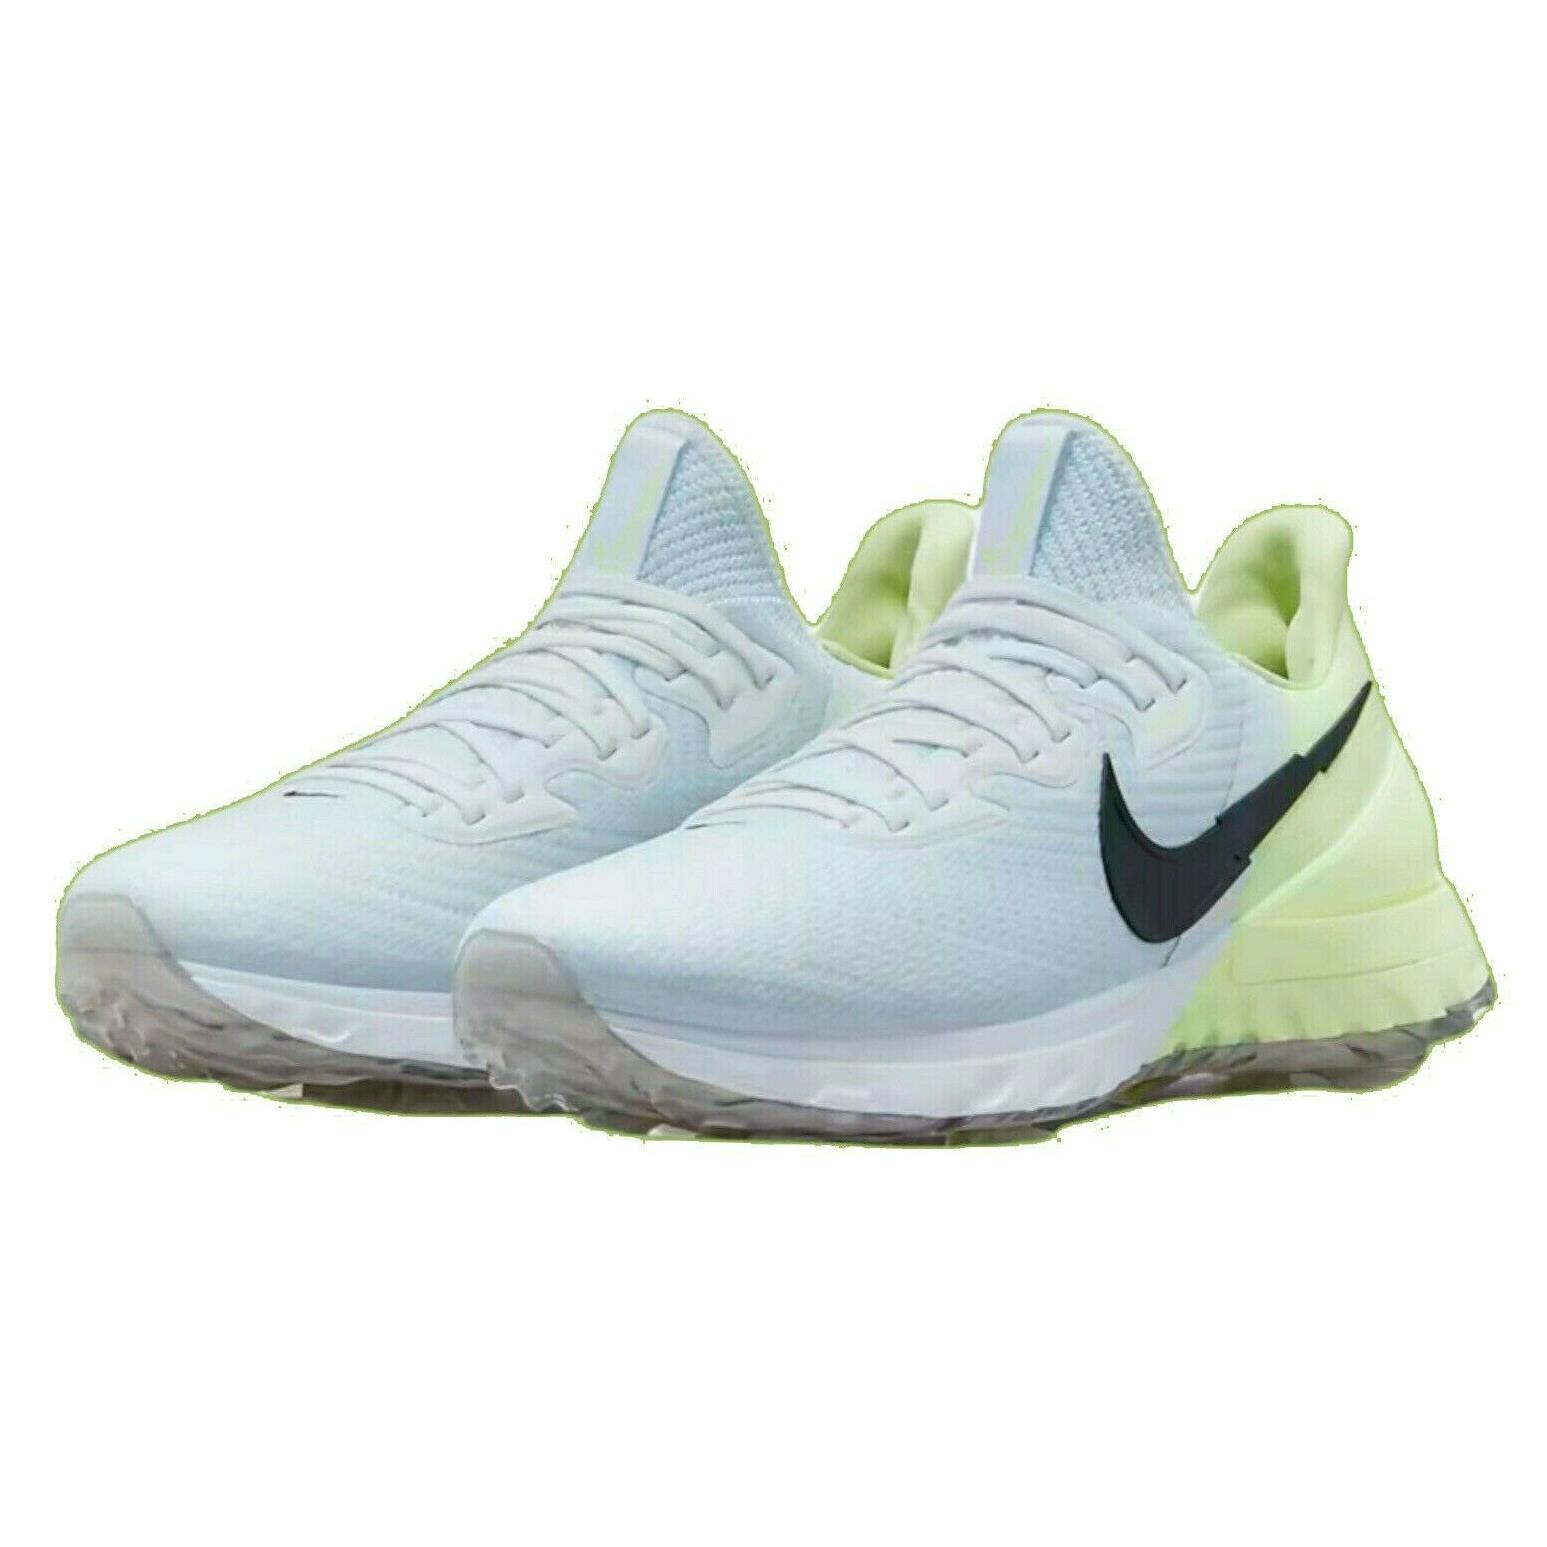 Nike Air Zoom Infinity Tour Mens Size 13 Golf Shoes CT0541 110 White Volt